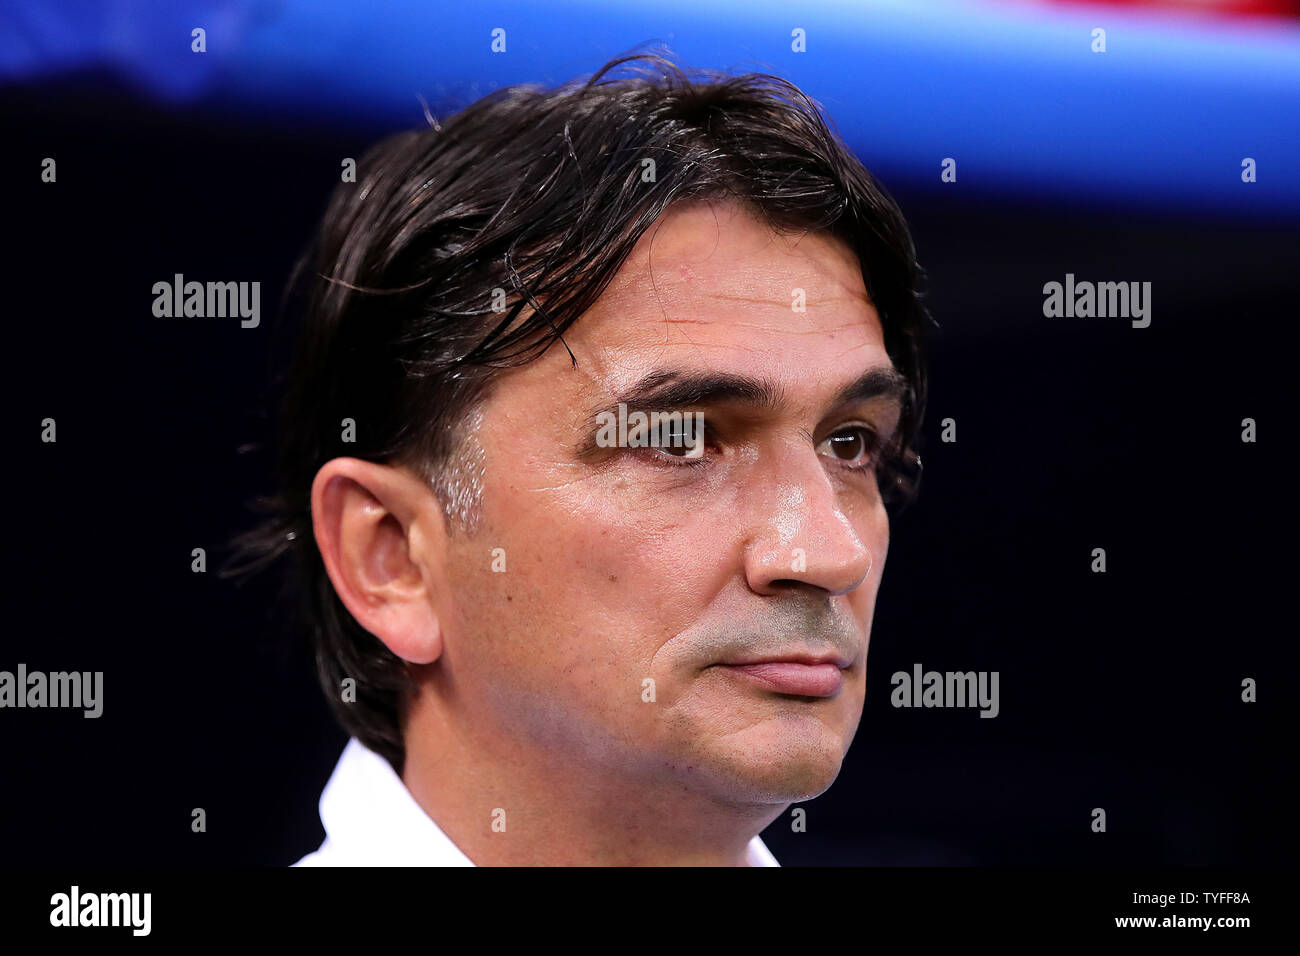 Croatia coach Zlatko Dalic looks on during the 2018 FIFA World Cup semi-final match at Luzhniki Stadium in Moscow, Russia on July 11, 2018. Croatia beat England 2-1 to qualify for the final. Photo by Chris Brunskill/UPI Stock Photo